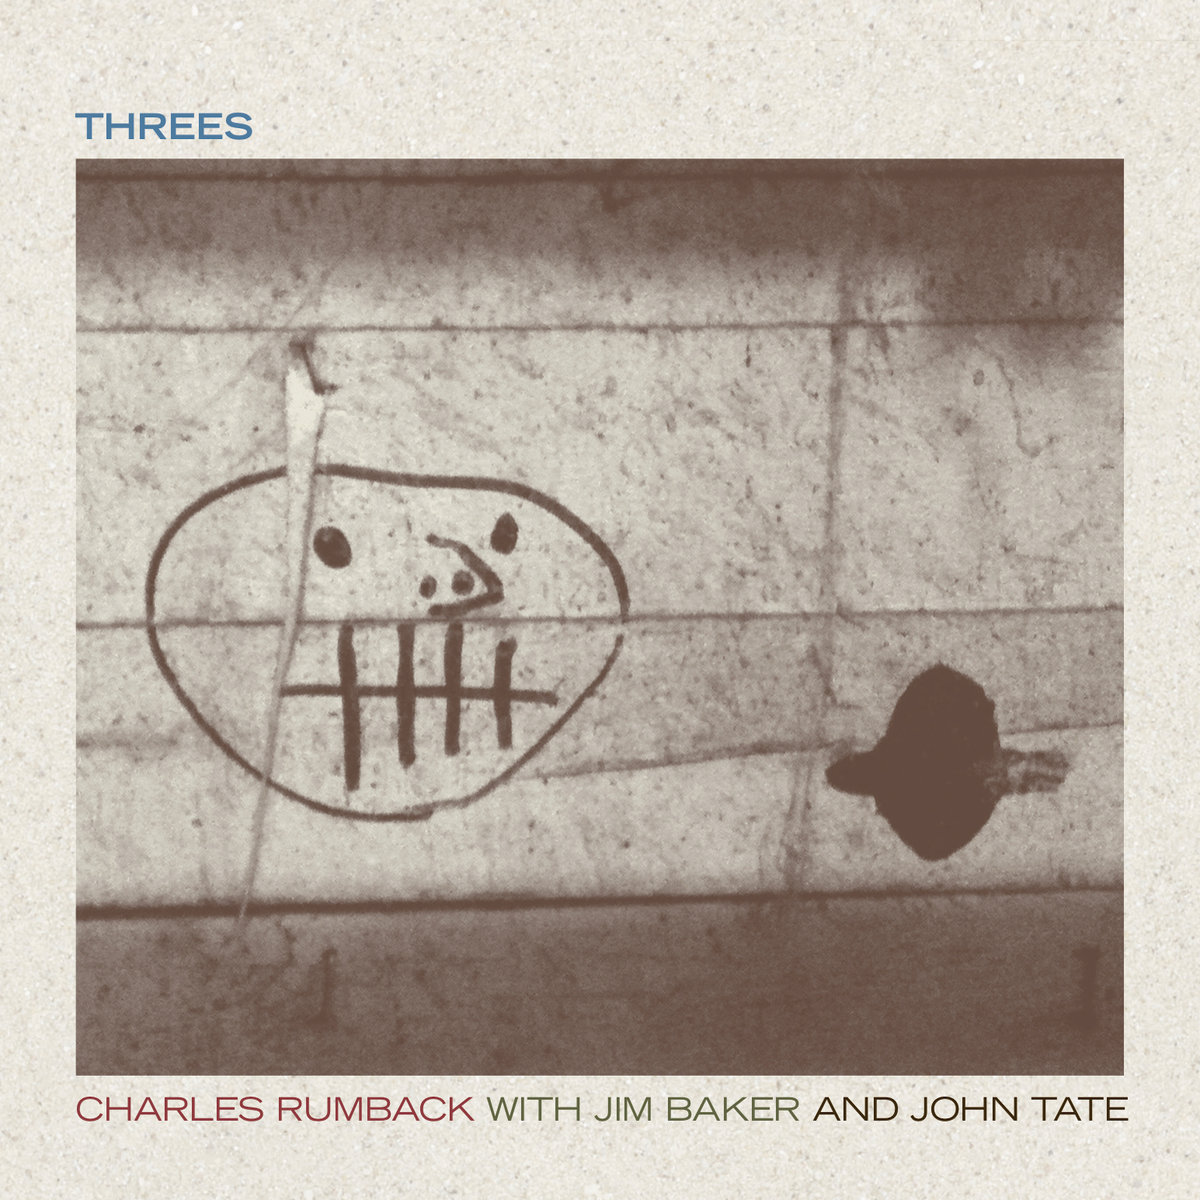 REVIEW: Charles Rumback - Threes